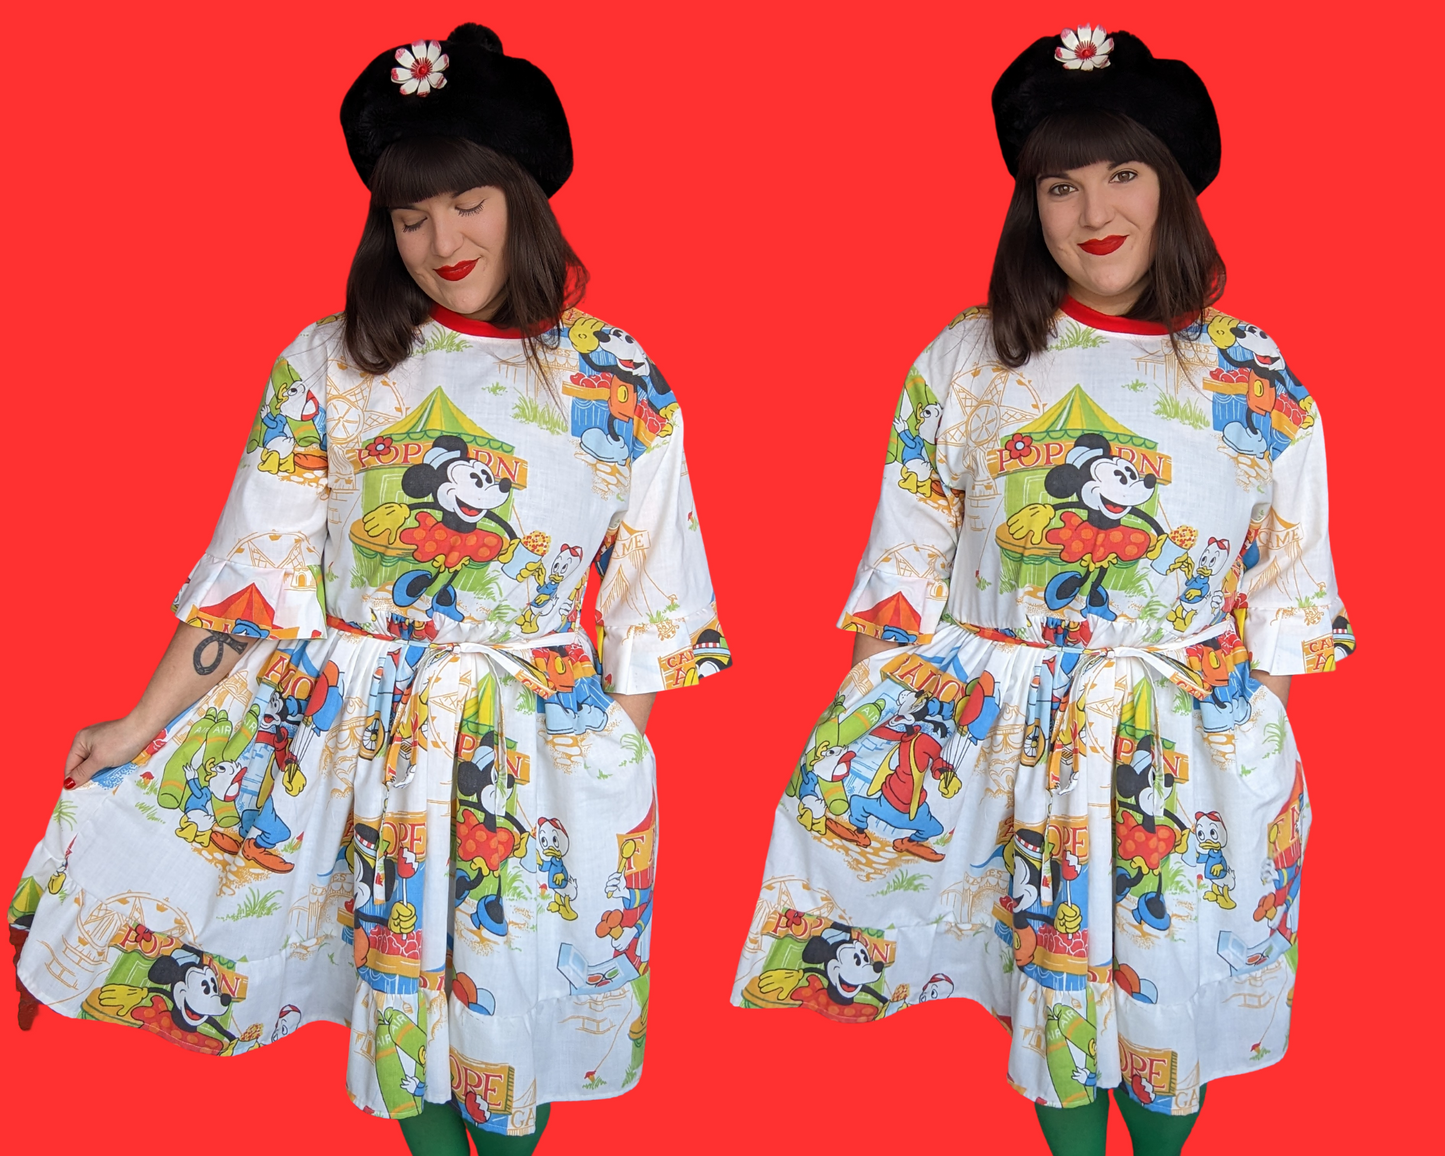 Handmade, Upcycled Disney Mickey Mouse and the Gang at The Carnival Bedsheet T-Shirt Dress Fits S-M-L-XL